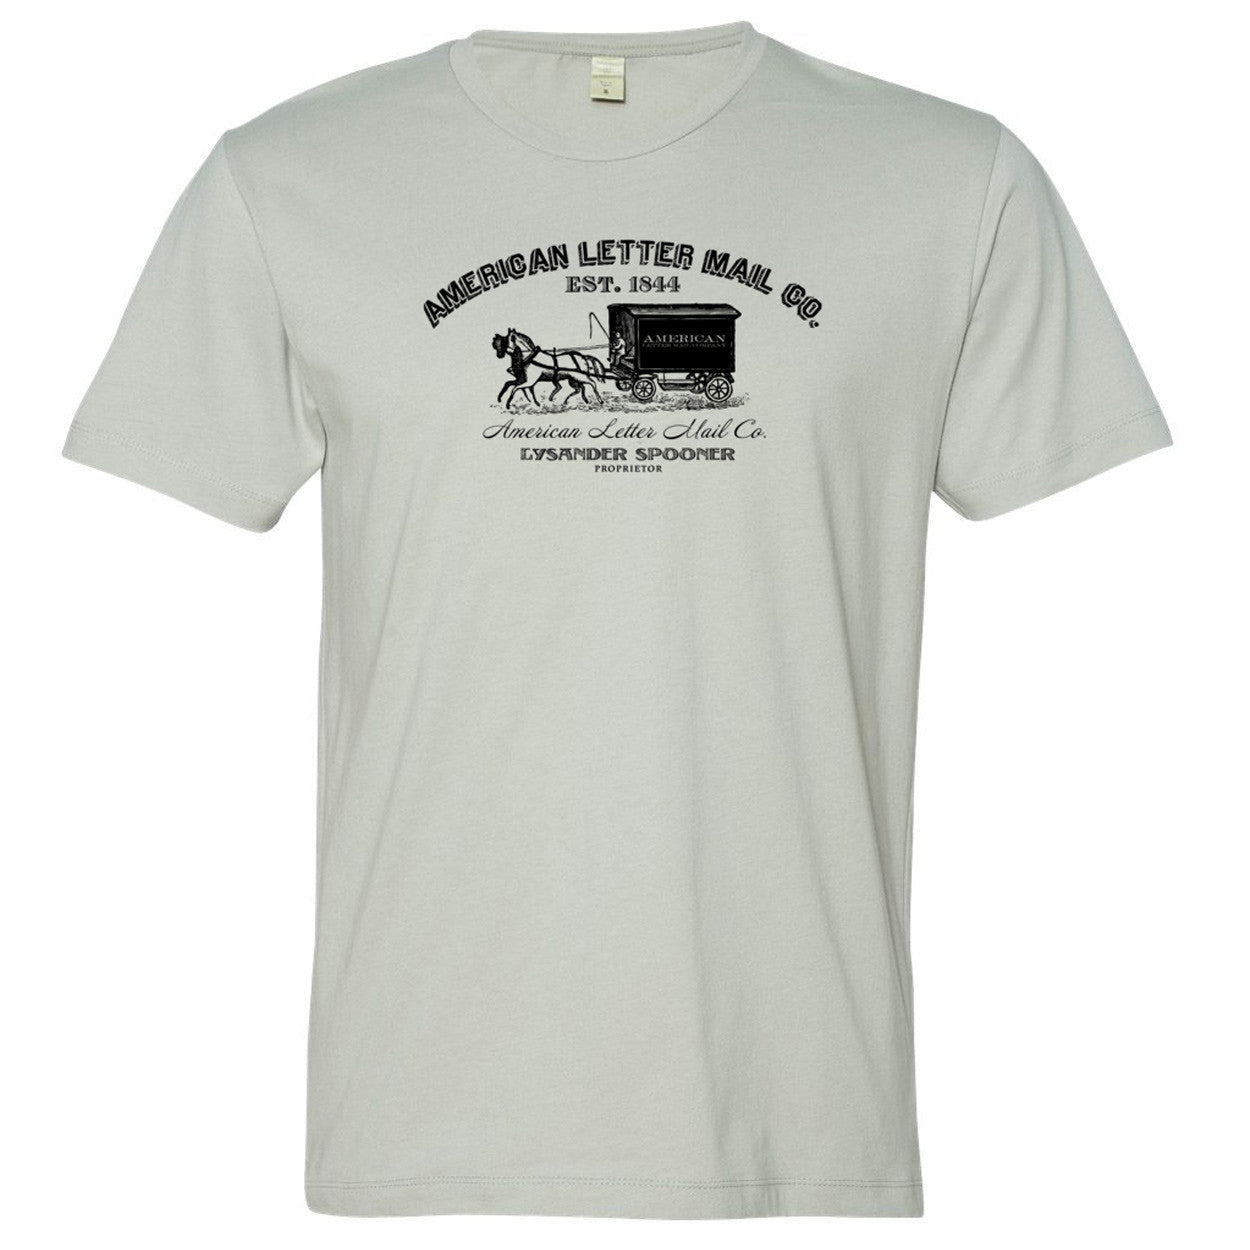 The American Letter Mail Company Vintage T-Shirt - Liberty Maniacs